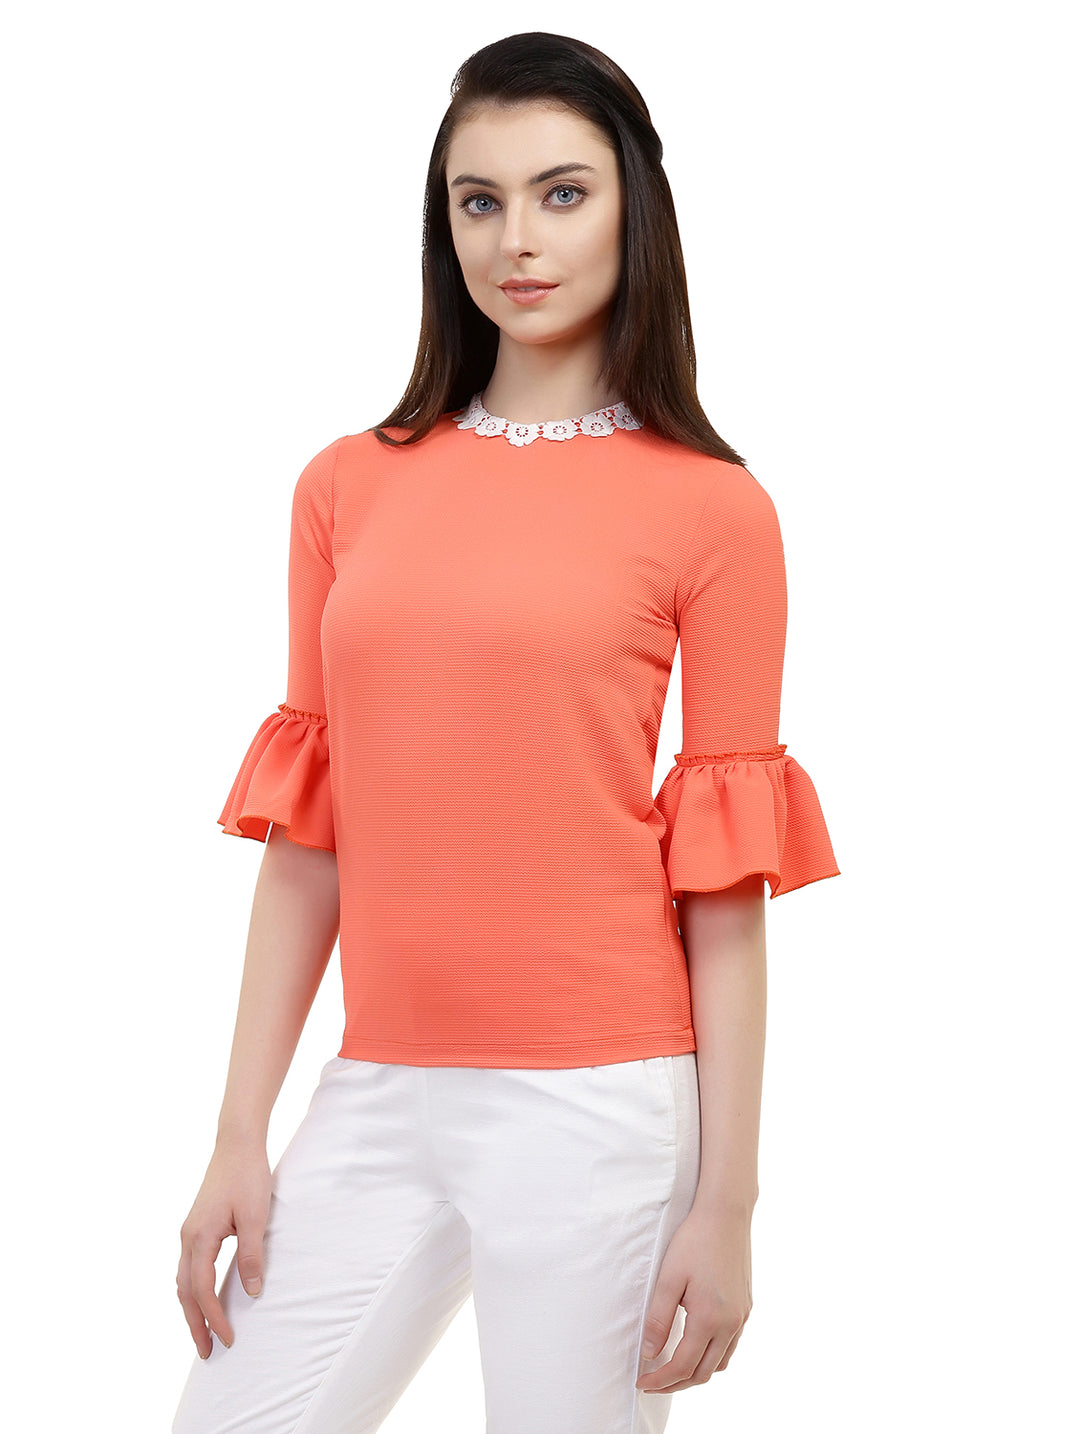 Orange Bell Top With Lace Collar